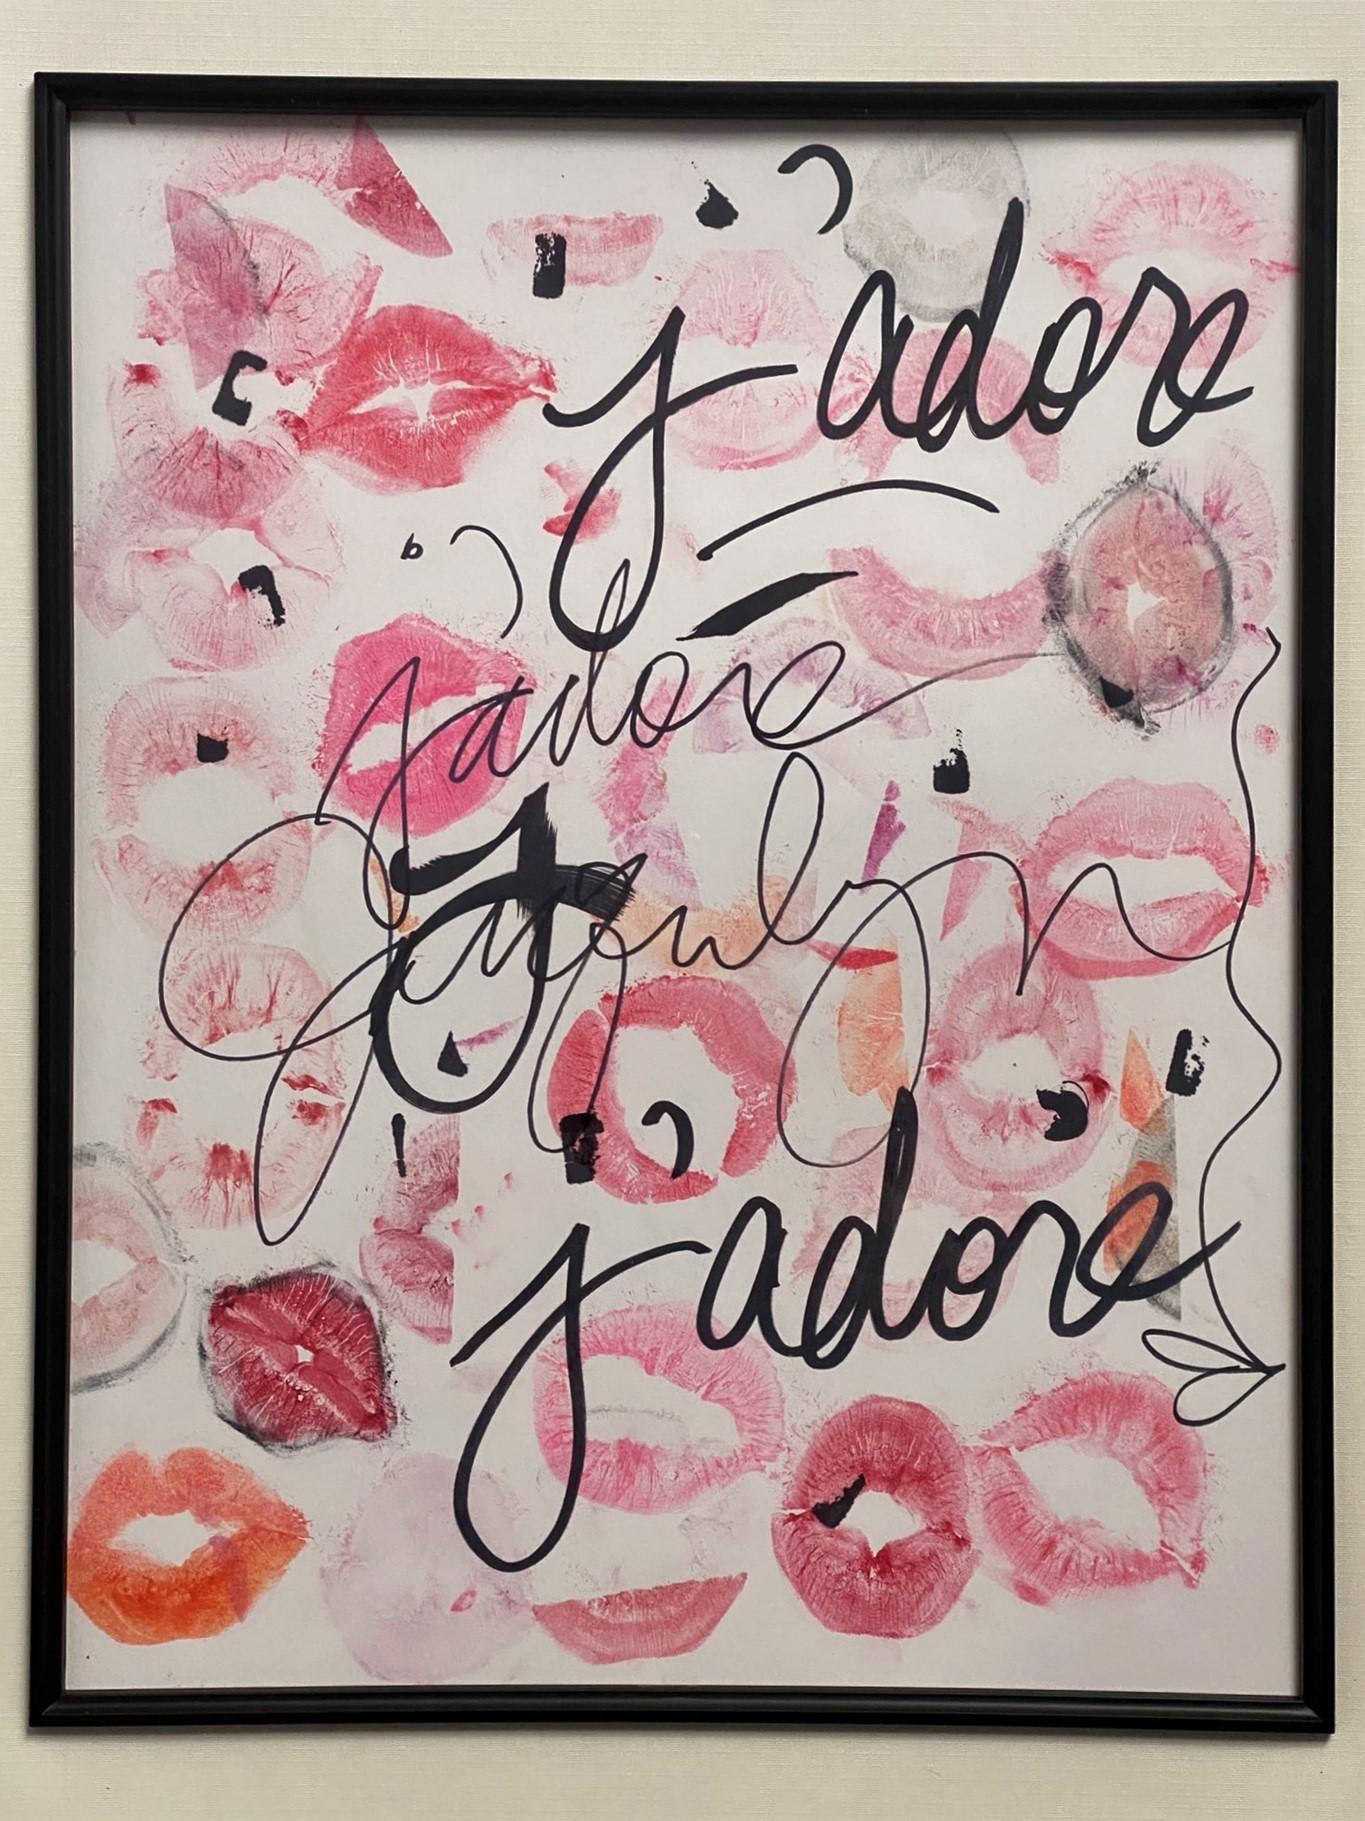 j'adore Jacquelyn - Abstract Painting by Leo Lopez